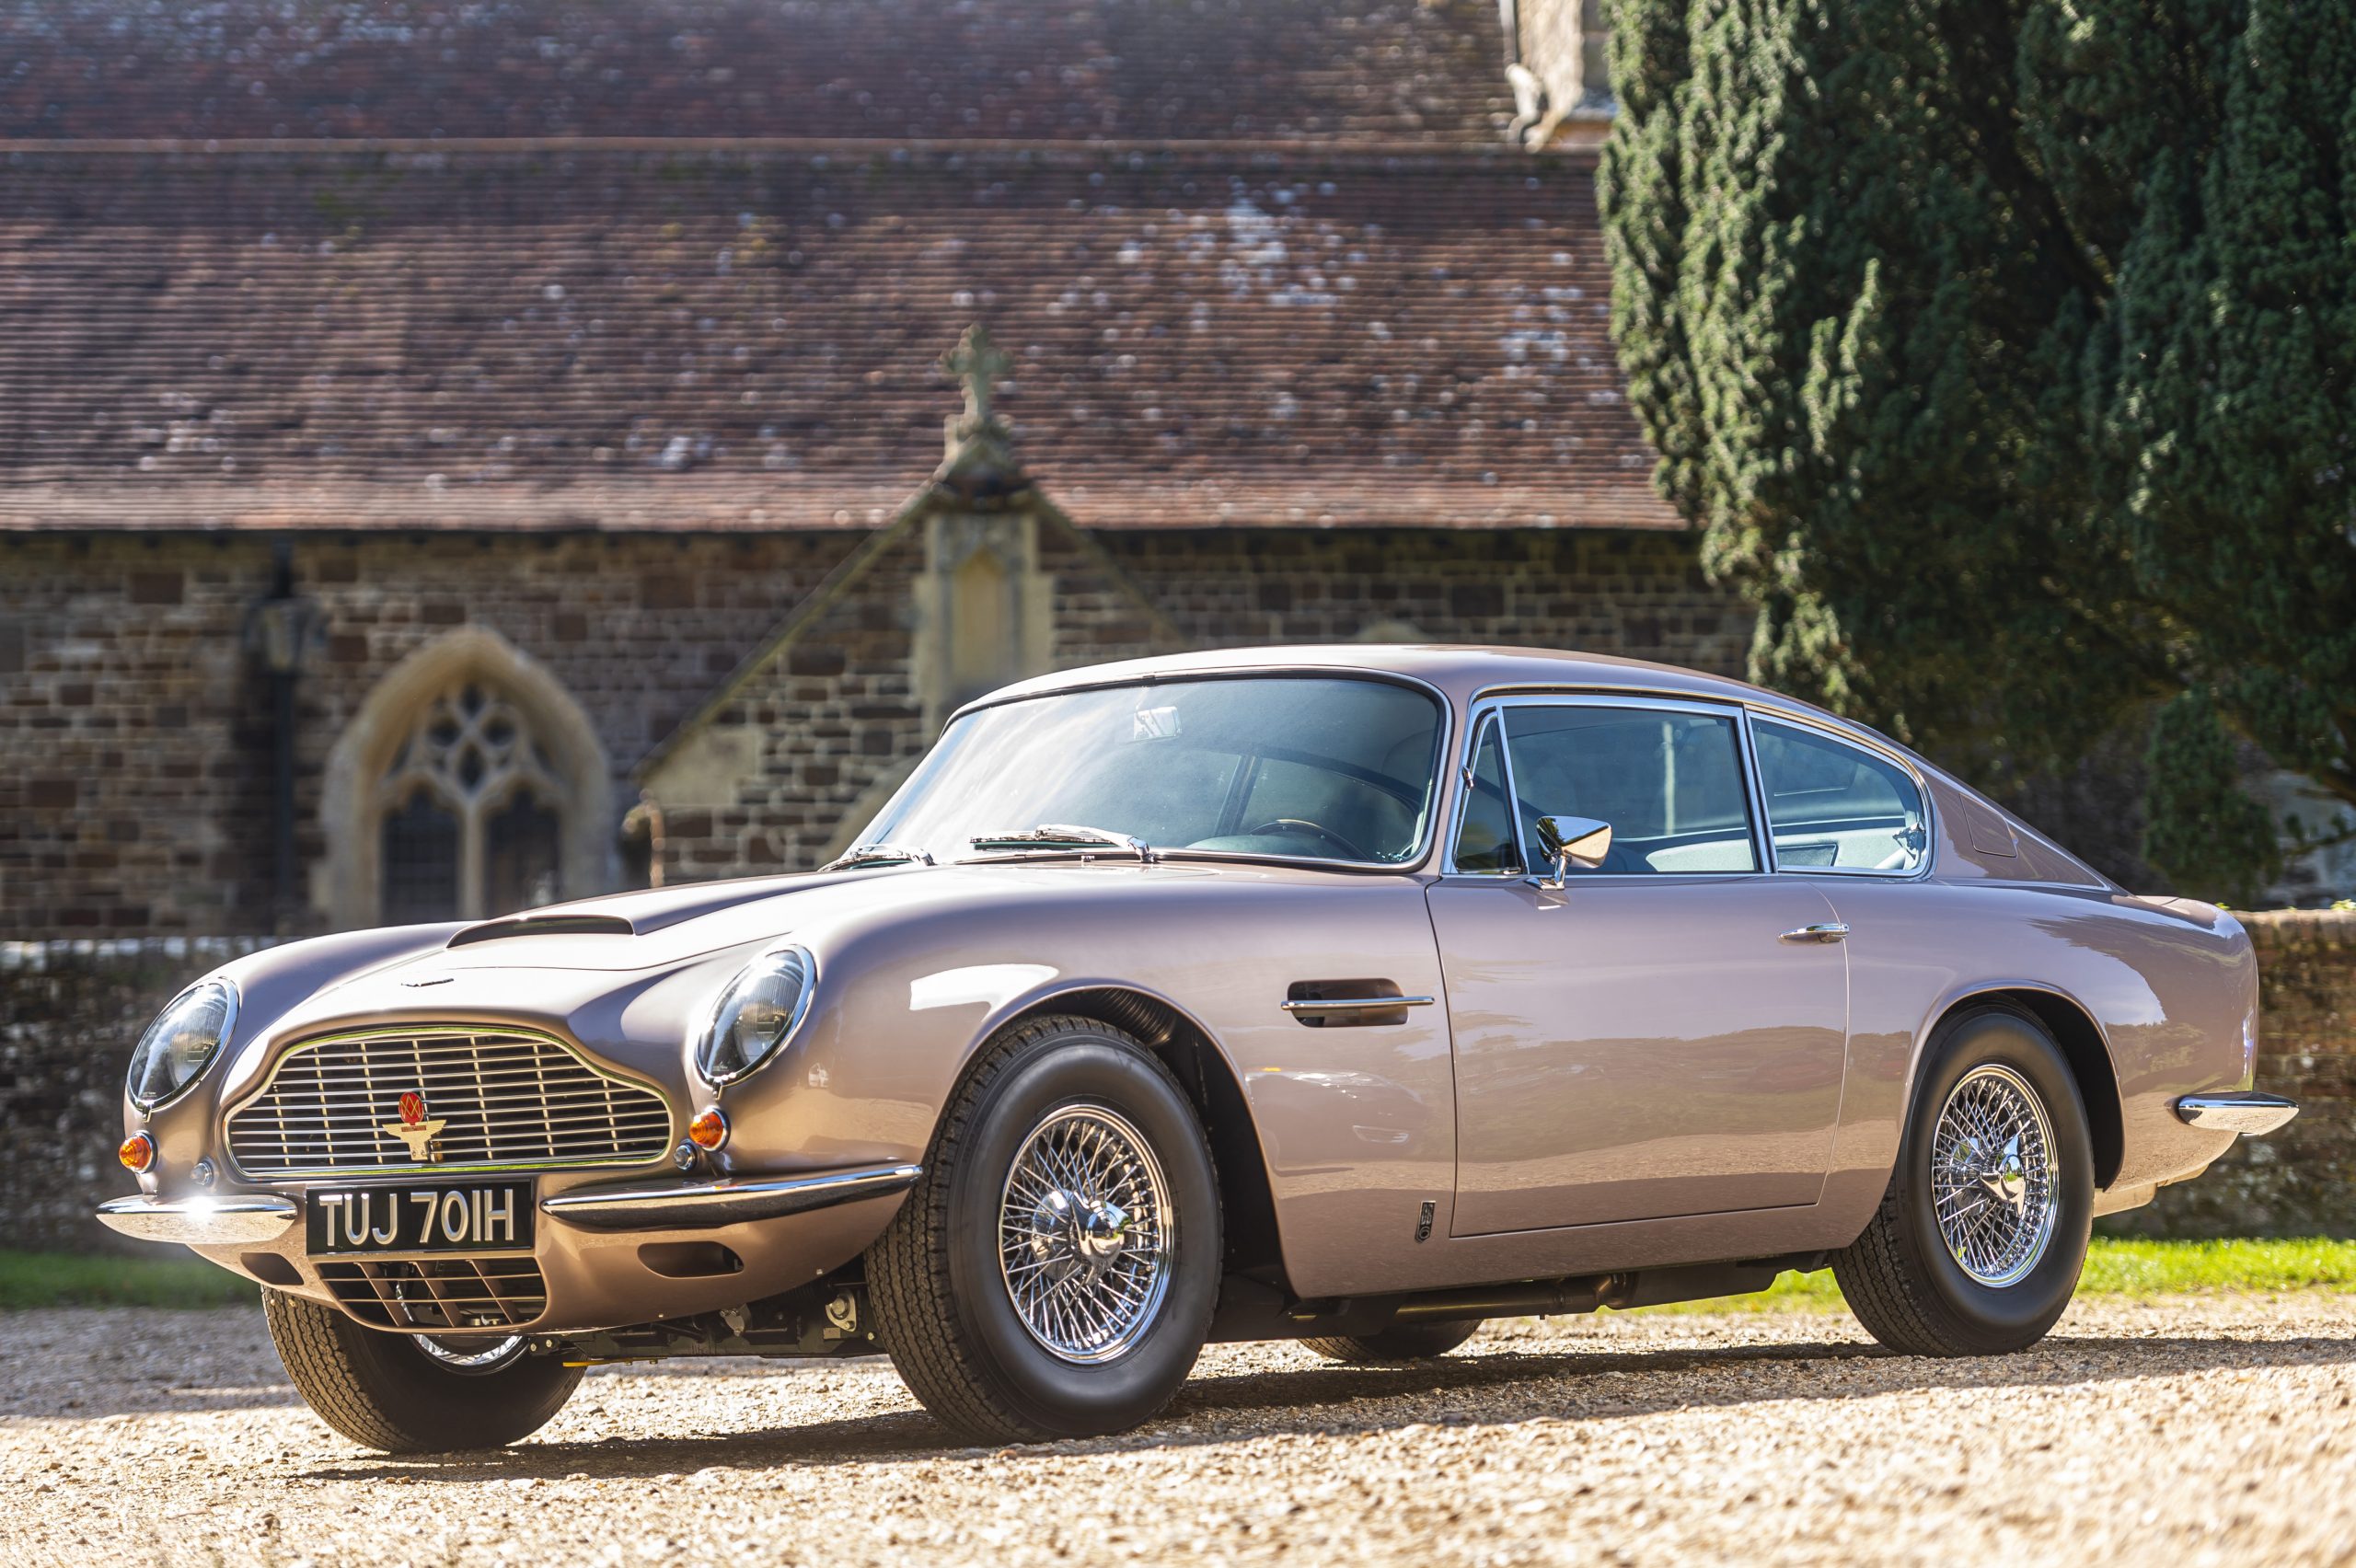 Classic Aston Martin found abandoned in field and looking like ‘Swiss cheese’ is now worth £500k